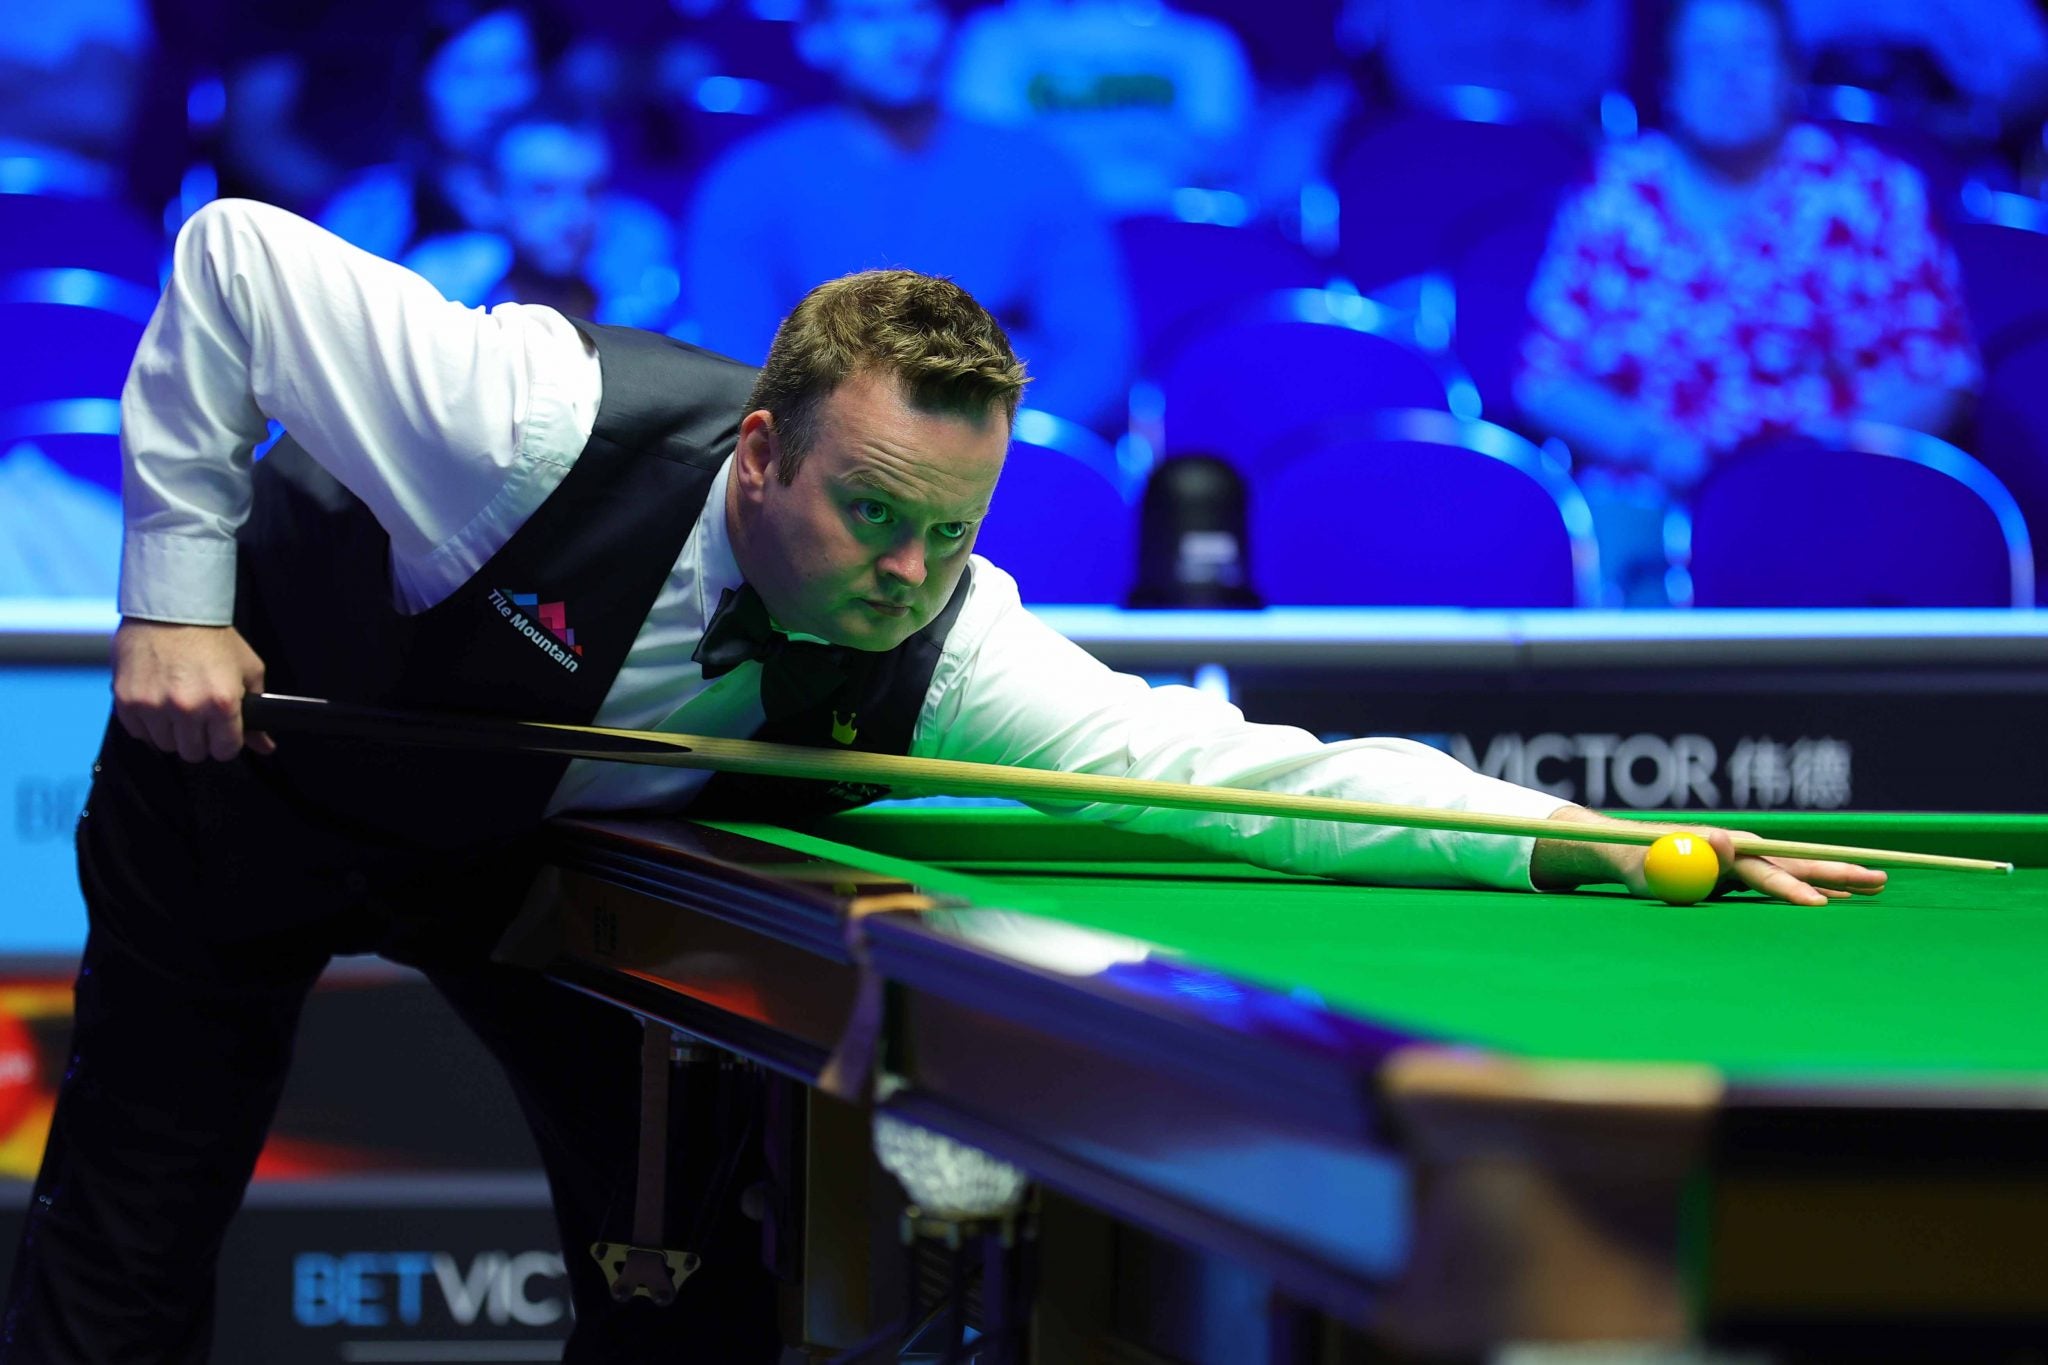 Snooker star Shaun Murphy undergoes weight loss surgery after fat-shaming on social media The Independent